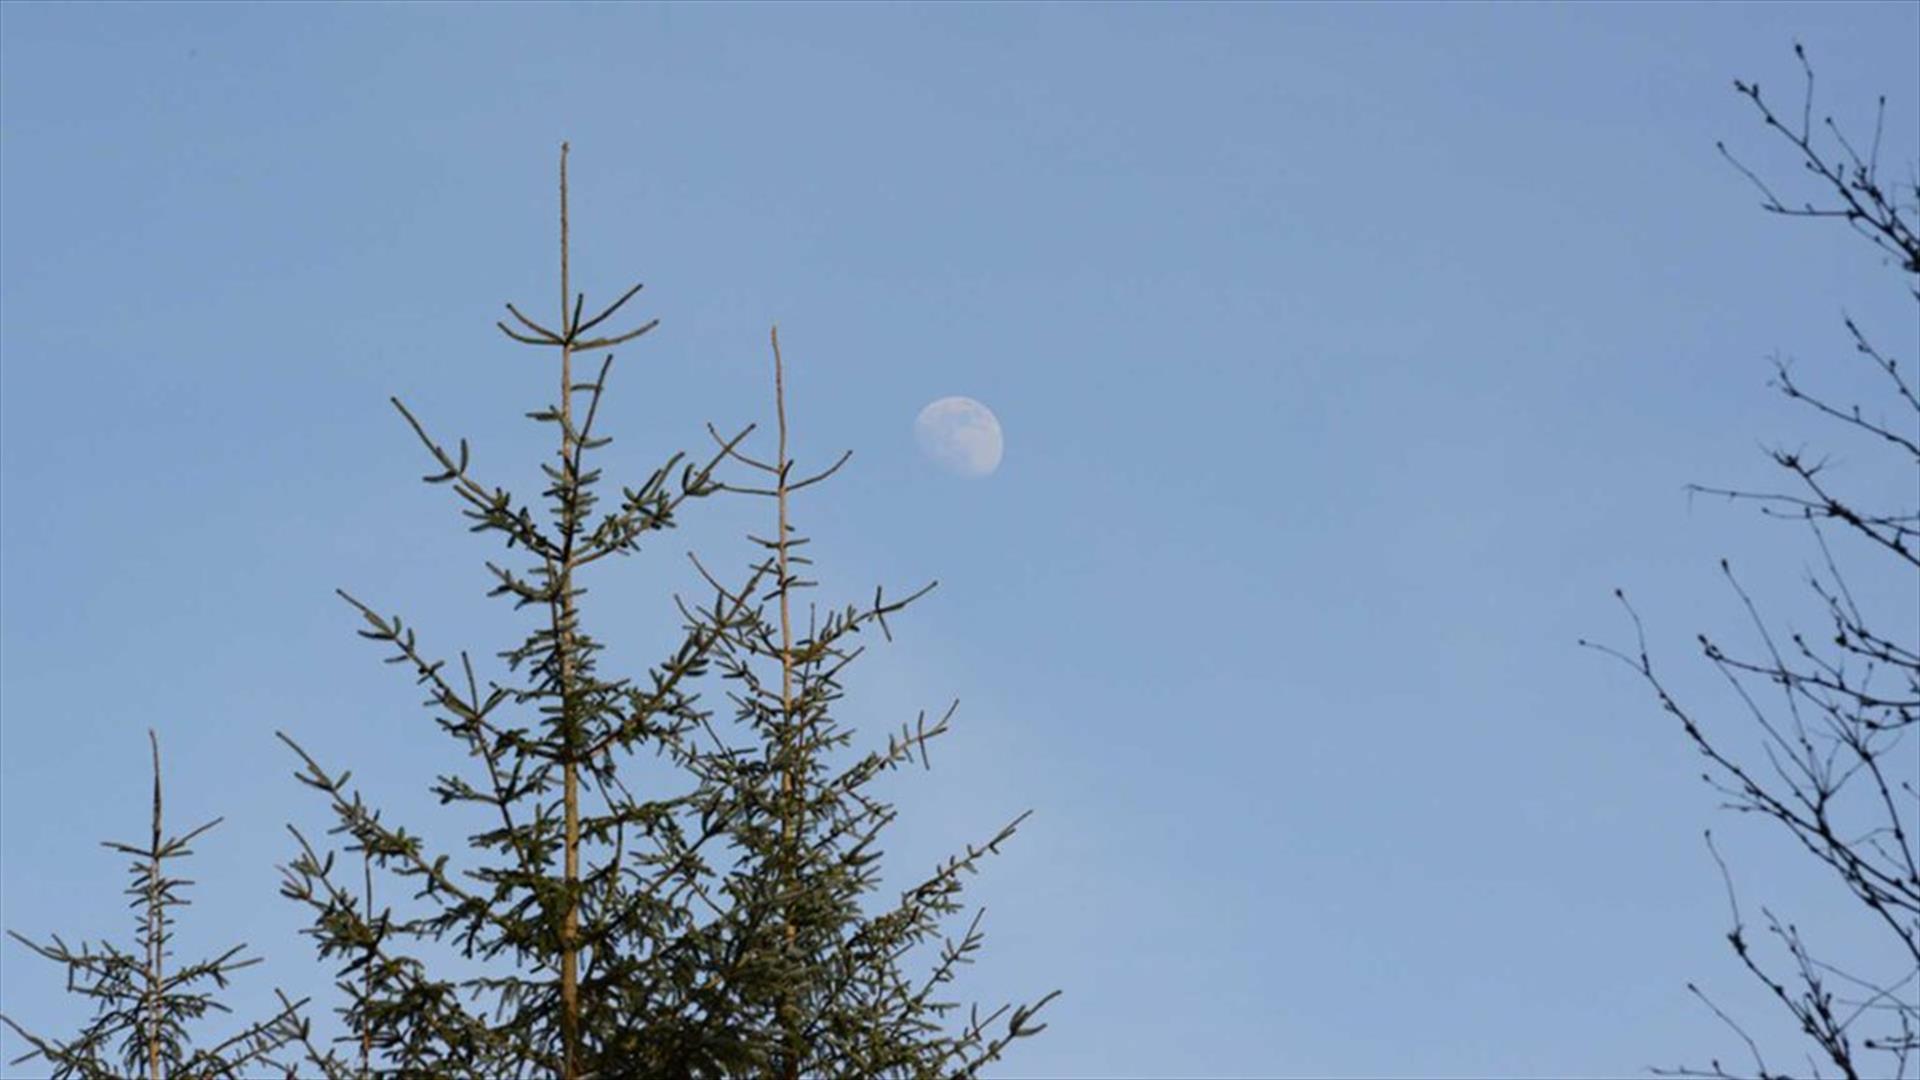 The Moon in the sky above trees in the forest